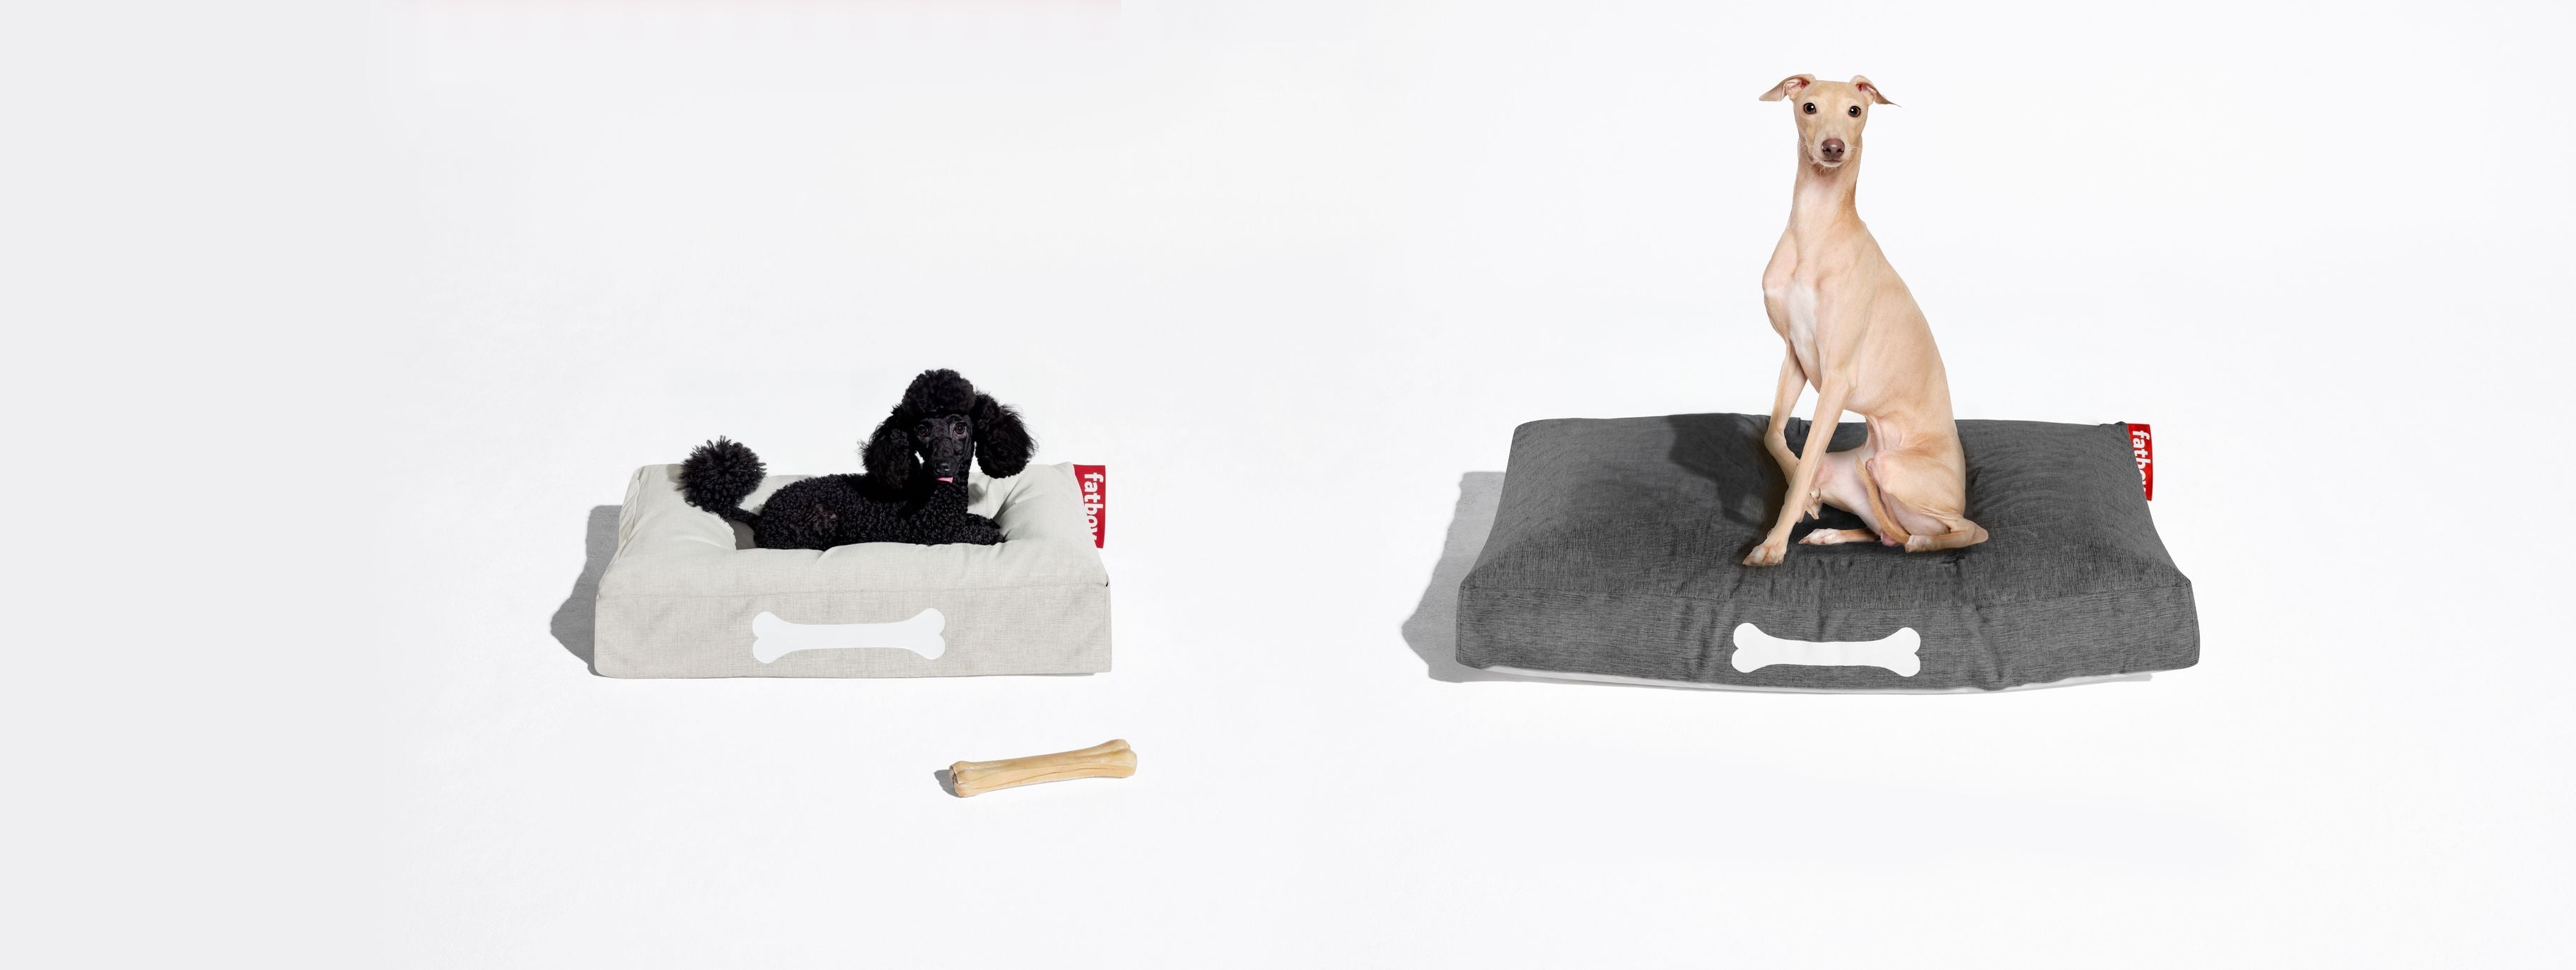 Fatboy Doggielounge olefin dogbed groot, dondergrijs